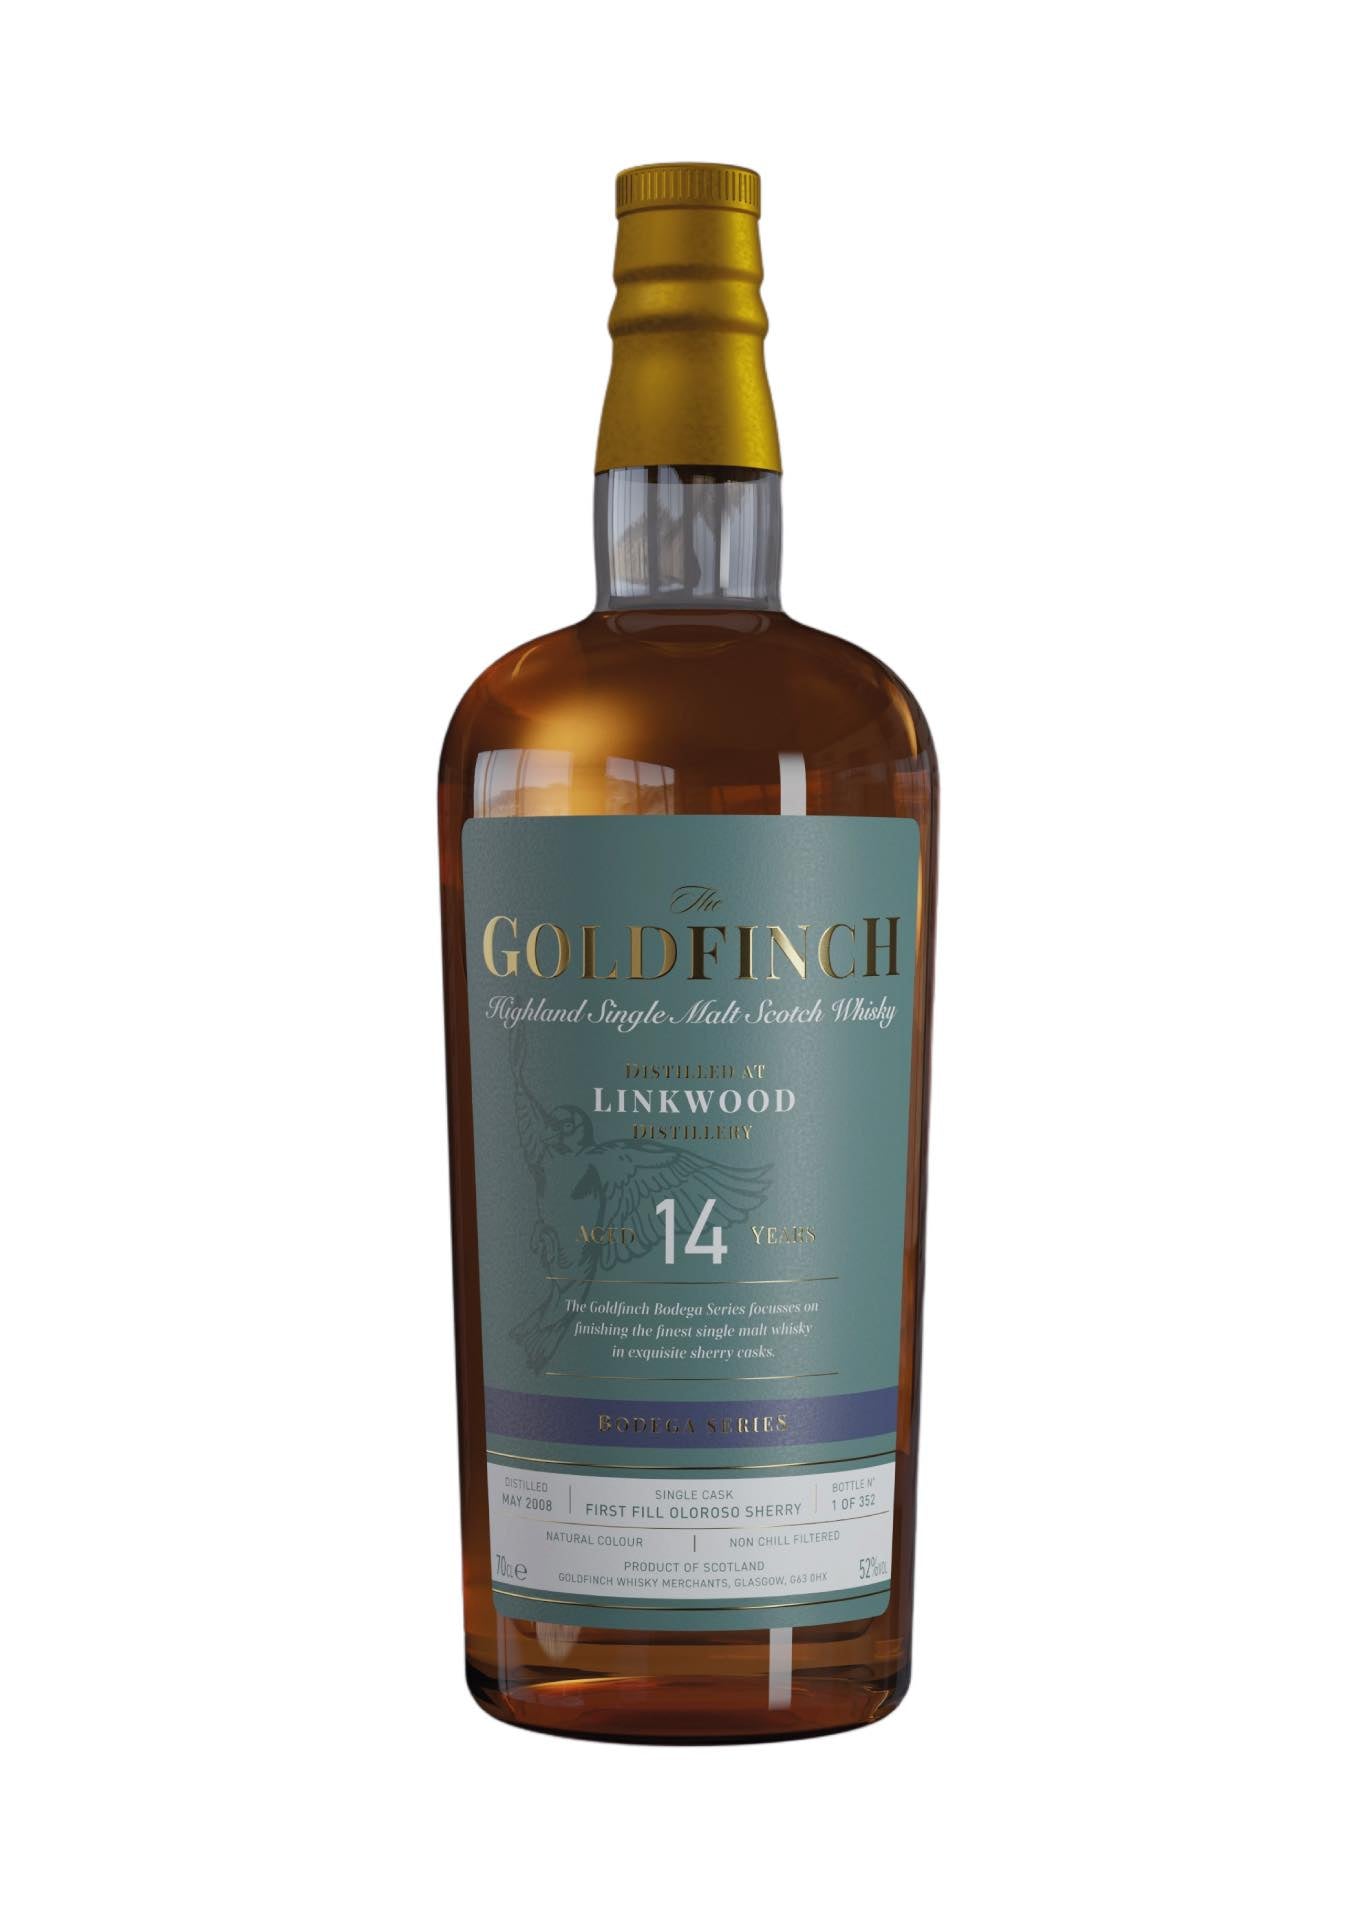 Goldfinch Linkwood 14 Year Old Single Cask Whisky